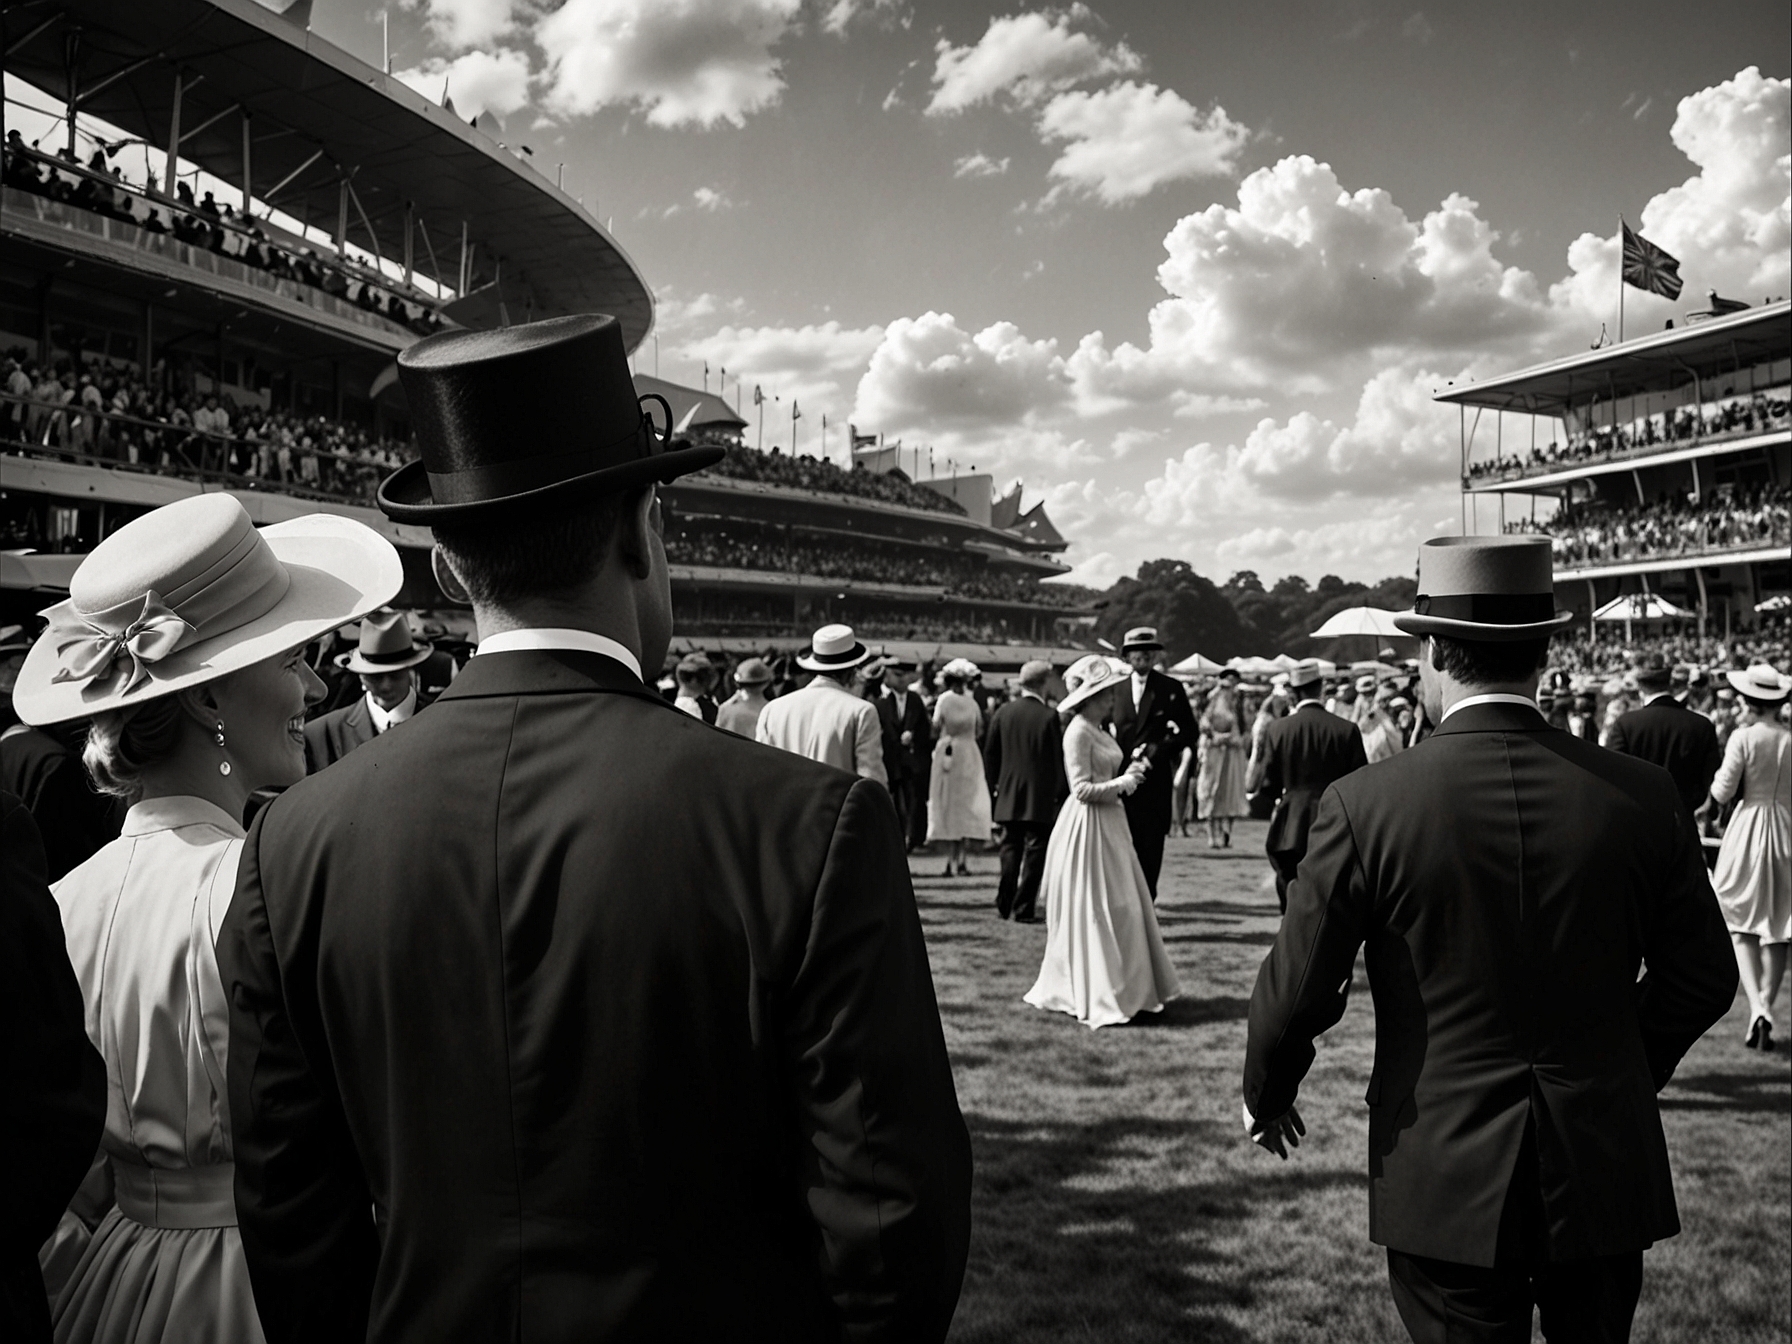 An elegant view of the Royal Enclosure at Royal Ascot, where members of the Royal Family and high society gather to enjoy the horse races in an atmosphere of sophistication and tradition.